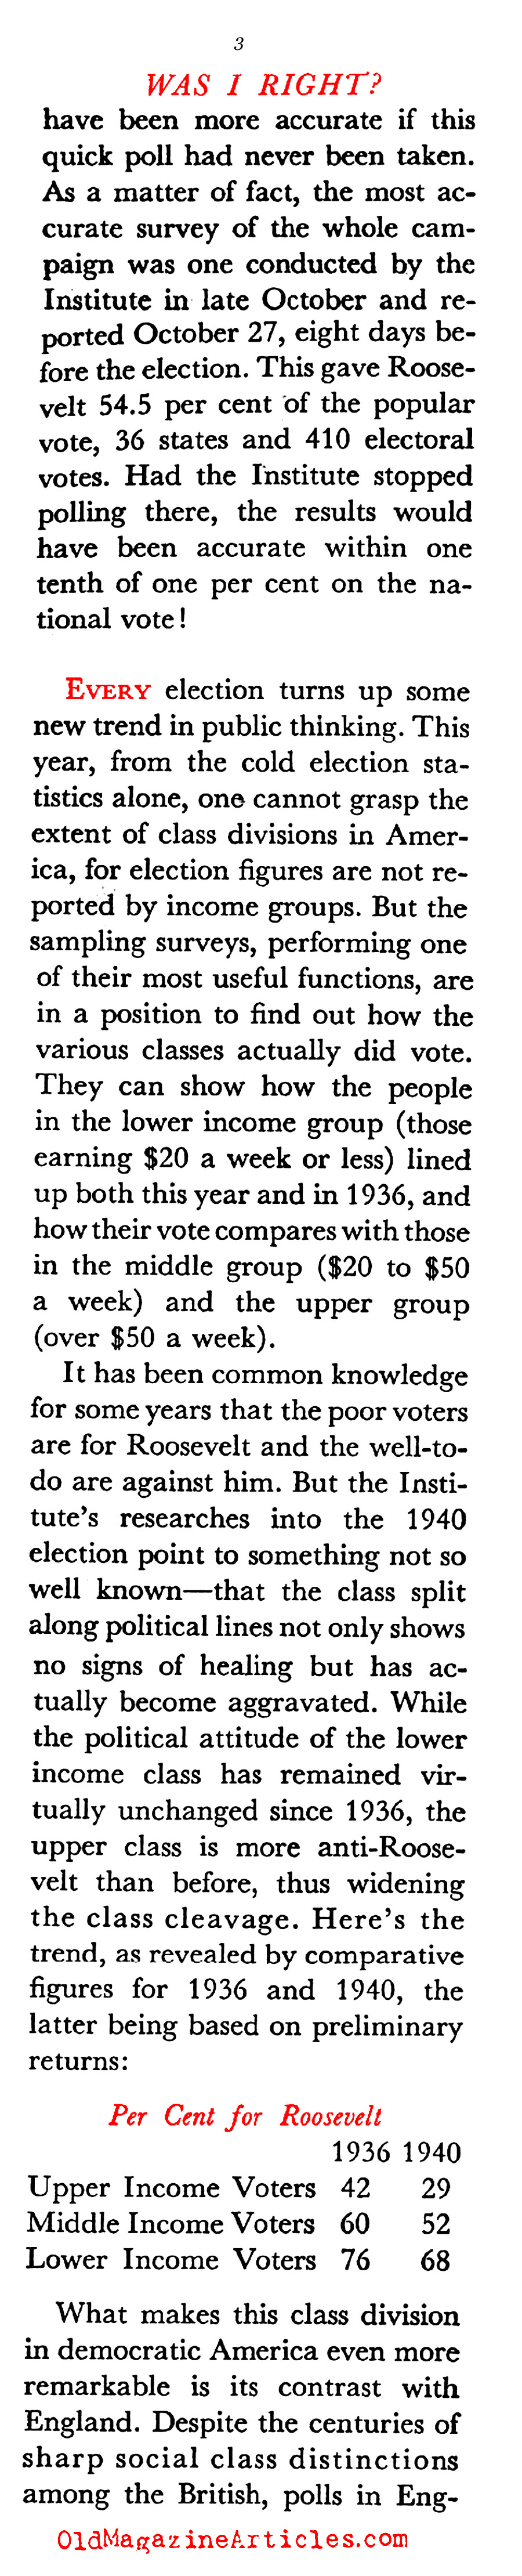 The 1940 Election Polls and FDR (Coronet Magazine, 1941)